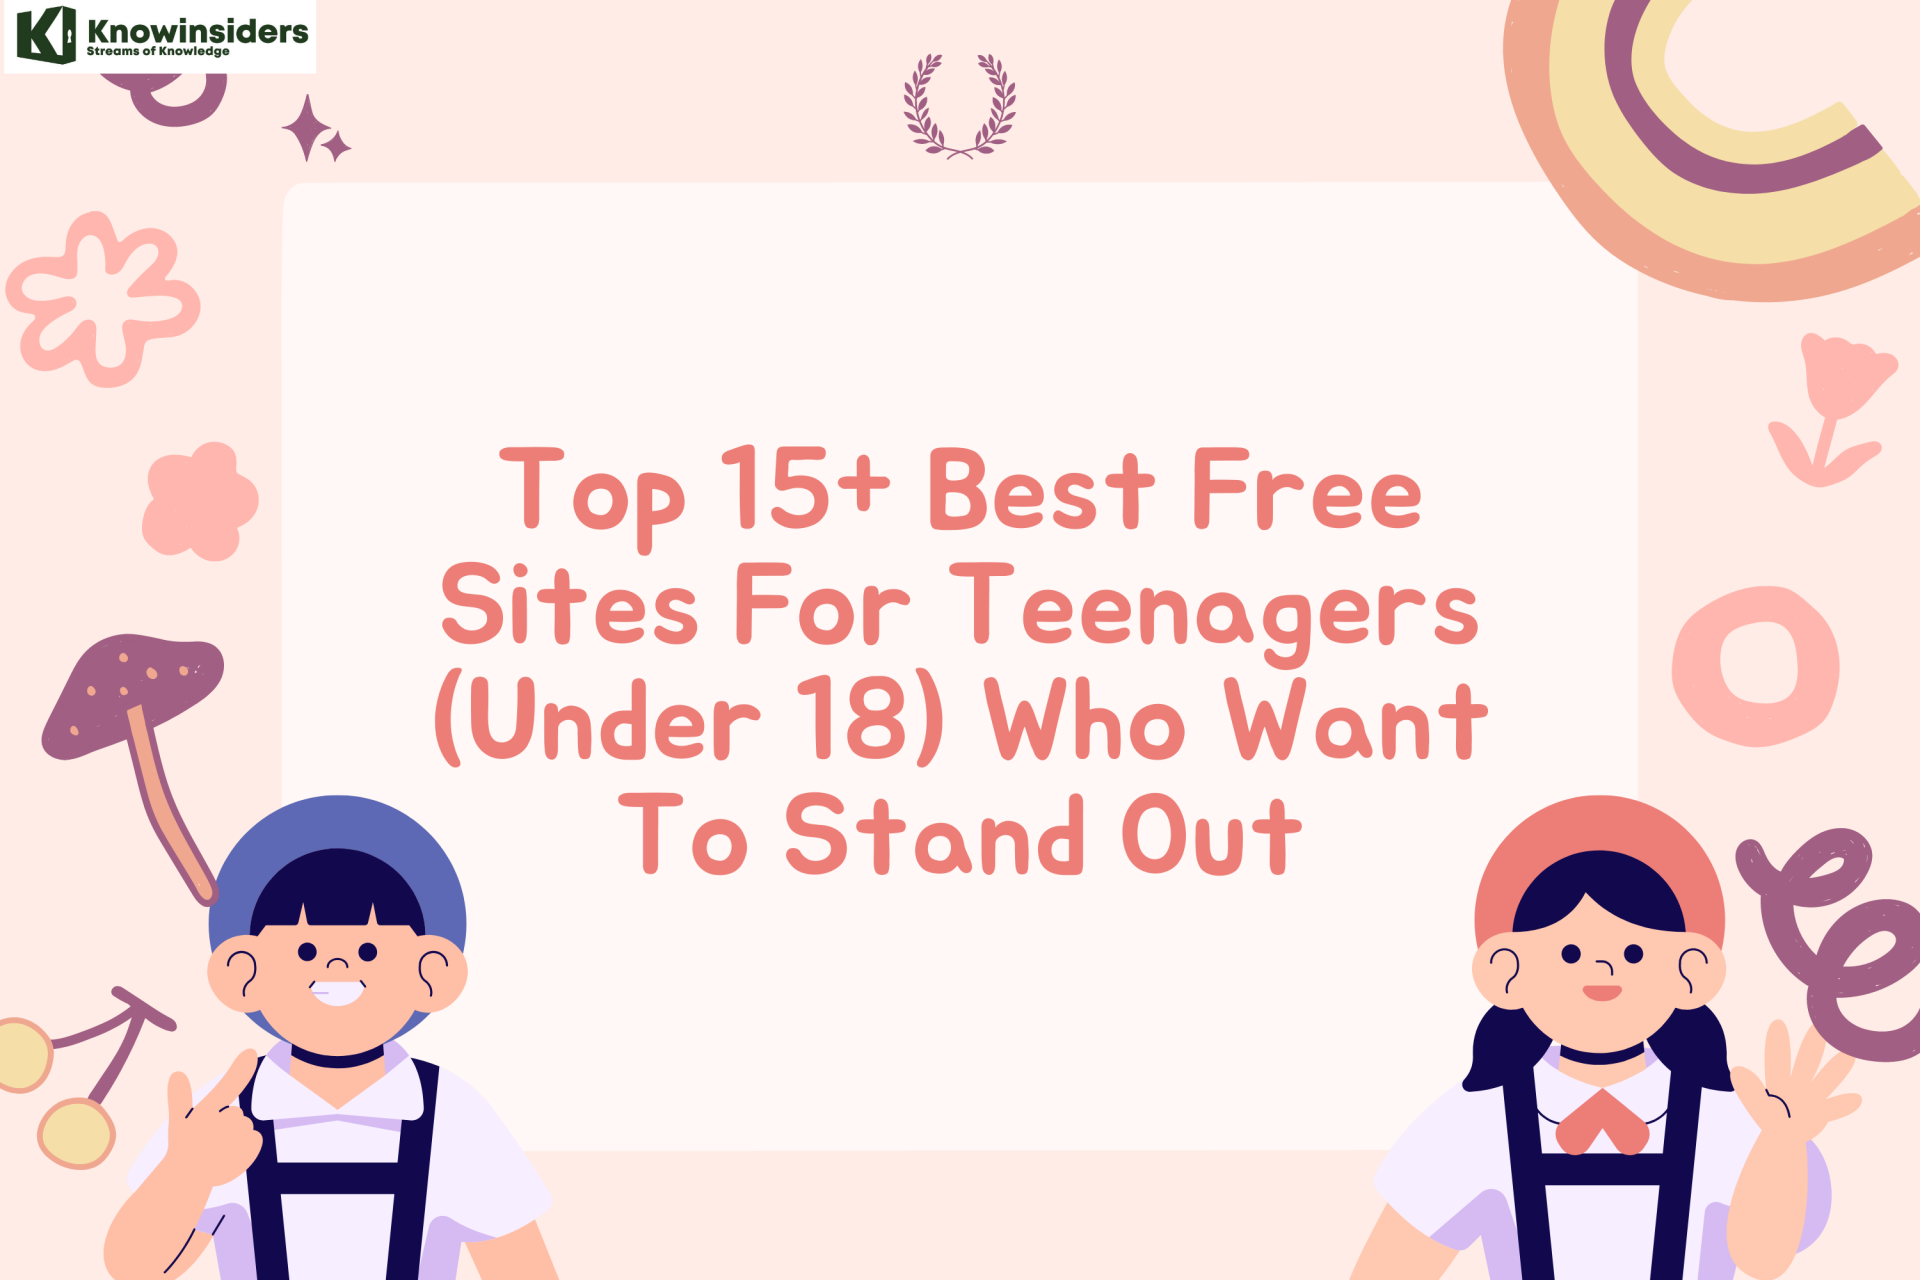 Top 15+ Free & Legal Sites For Teenagers (Under 18) Who Want To Stand Out